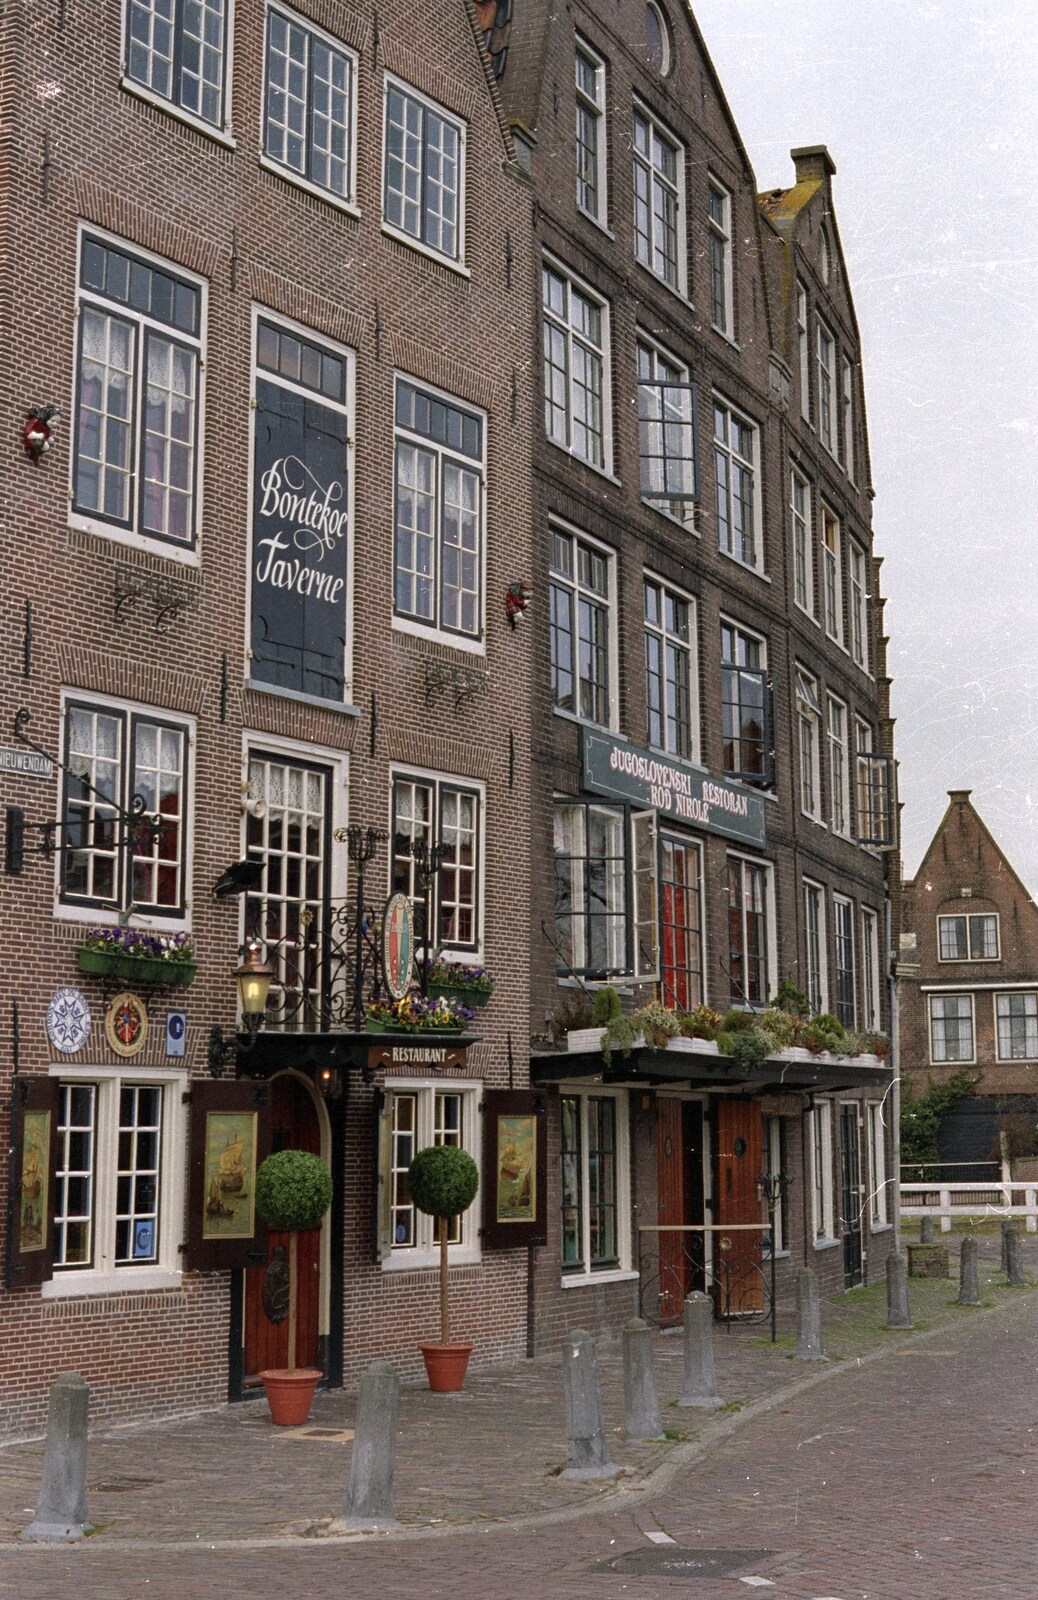 Out and About in Amsterdam, Hoorne, Vollendam and Edam, The Netherlands - 26th March 1992: The Bontekoe Tavernein, Hoorne